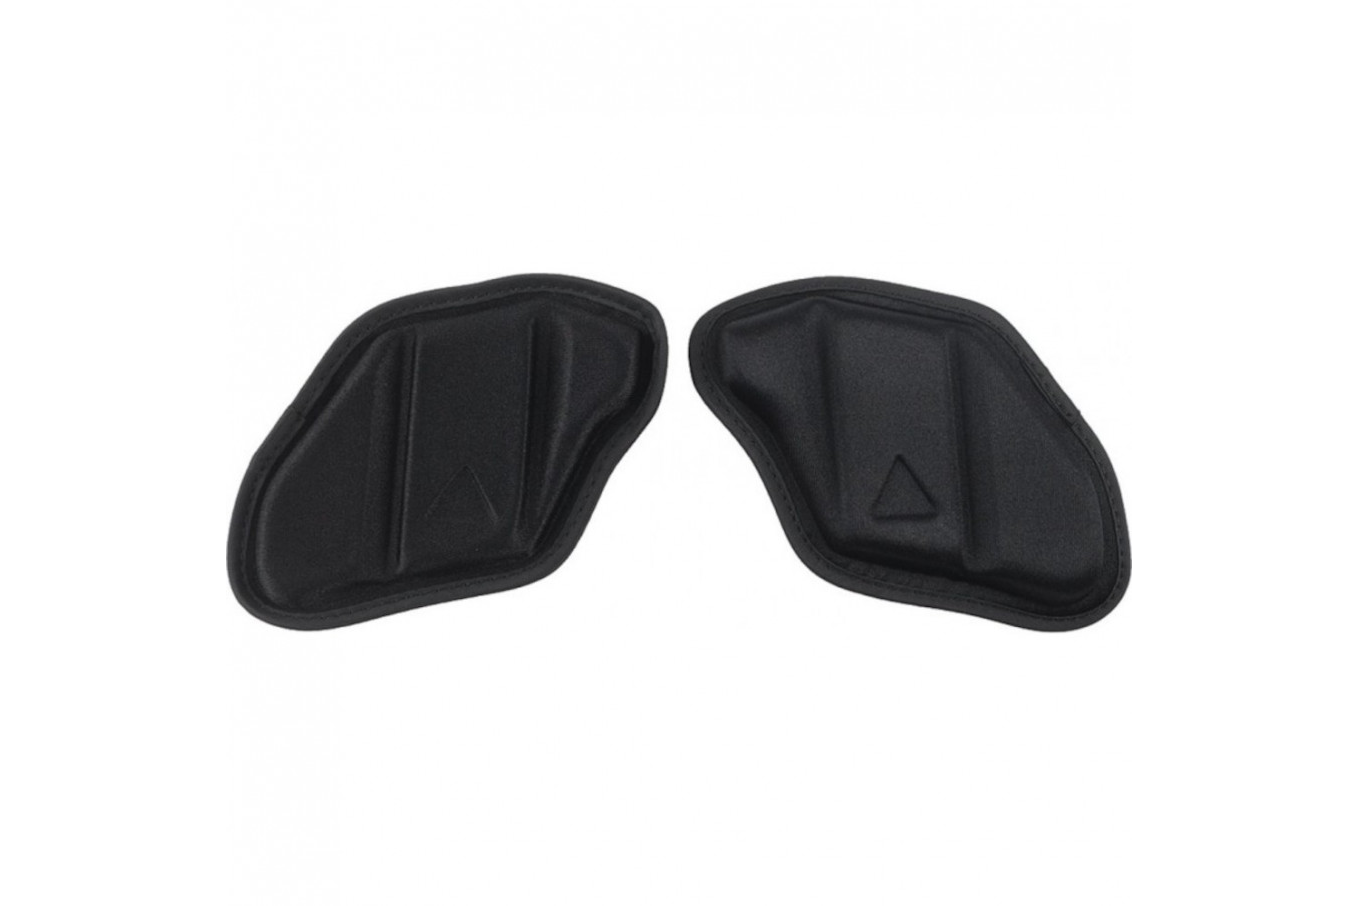 Profile Designs F-22 Pads with Strap